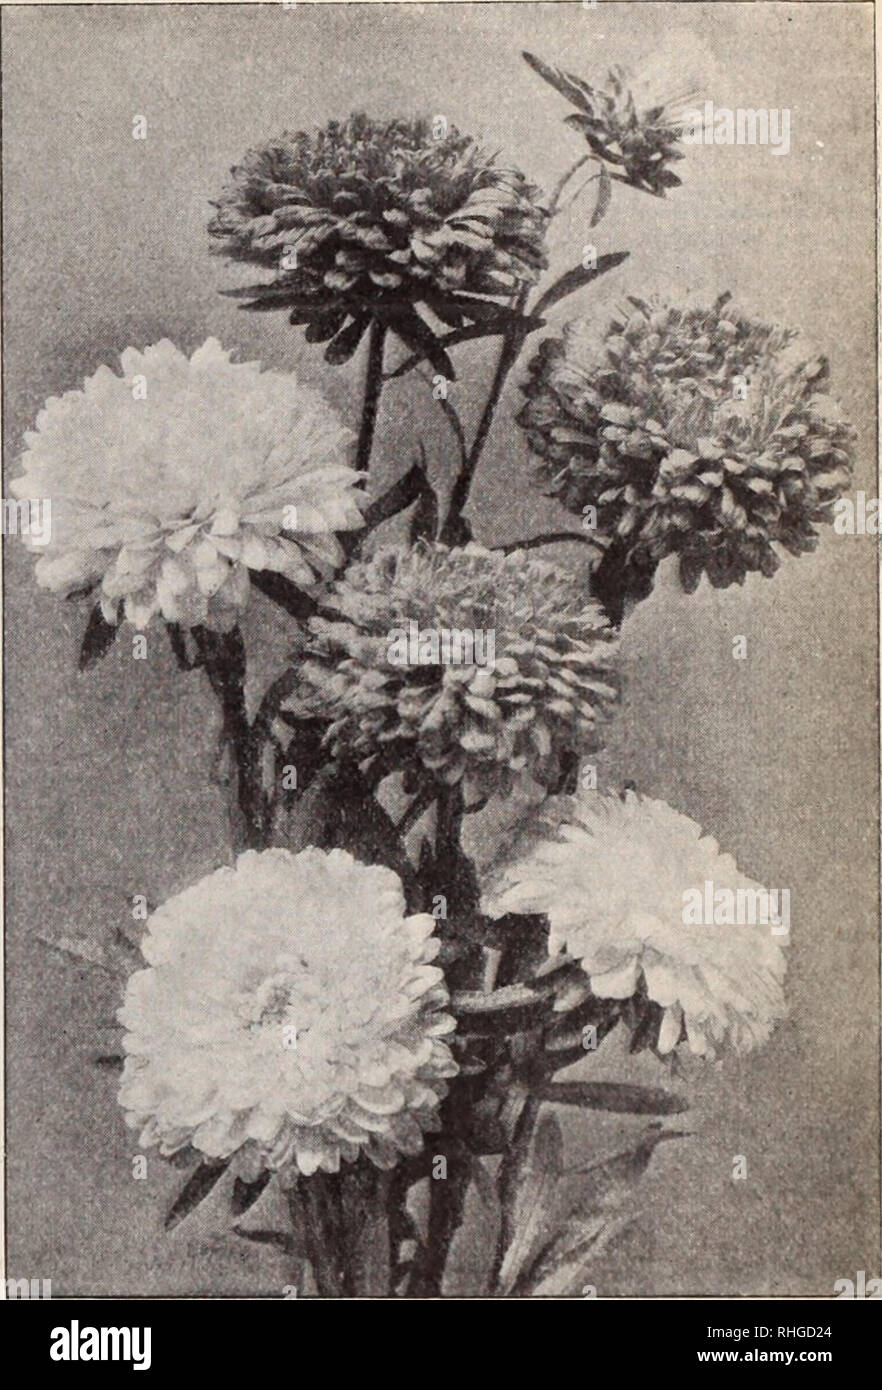 . Boddington's quality bulbs, seeds and plants / Arthur T. Boddington.. Nursery Catalogue. Victoria Abters whorl of shorter cnrUtl and twisted ones, like Japanese chrysanthemum forms flowers of t xtraordinary size and beauty. Pkt Snow-White Rose Light Blue Dark Blue Lilac Peach Blossom Pkt. So lO Si OO .. to 1 OO . lO I OO I OO . lO I (X5 I no Crimson $o lo Scarlet lo Yellow lo White, changing to Amethyst-Blue 2^ Mixed 10 %oz. $1 00 I 00 I 00 The collection of 10 vaiieties for 76 cts. Boddington's Branching Giant Comet. White 10 i n Truffaut's Peony Perfection Asters The class is remarkable fo Stock Photo